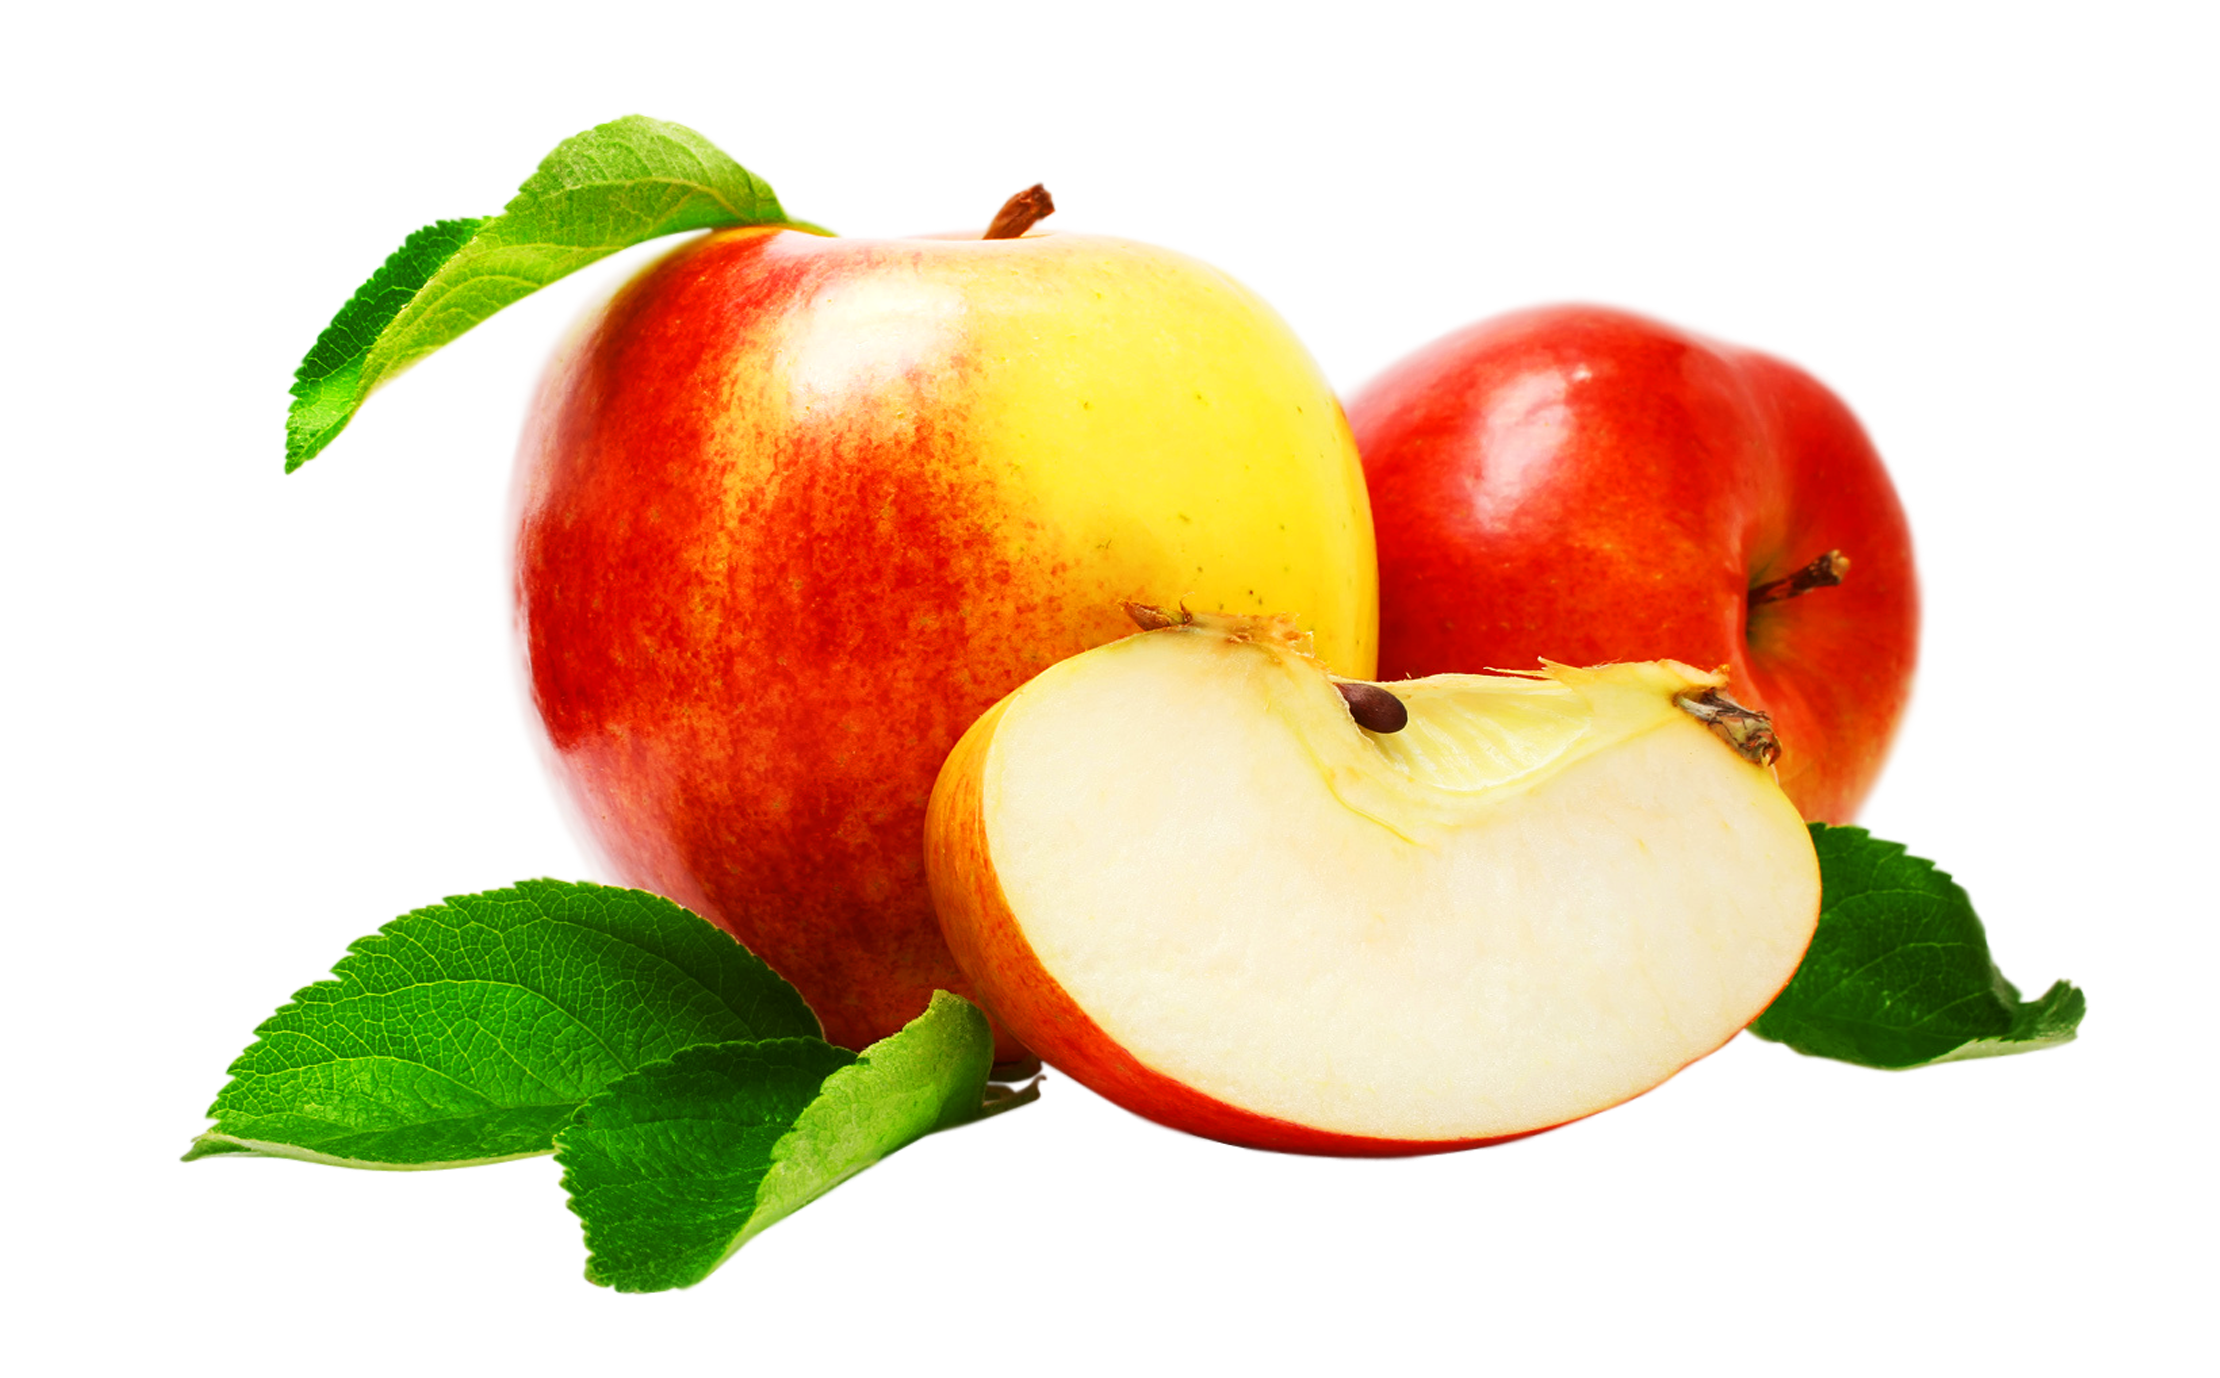 Apple Fruit PNG HD and HQ Image